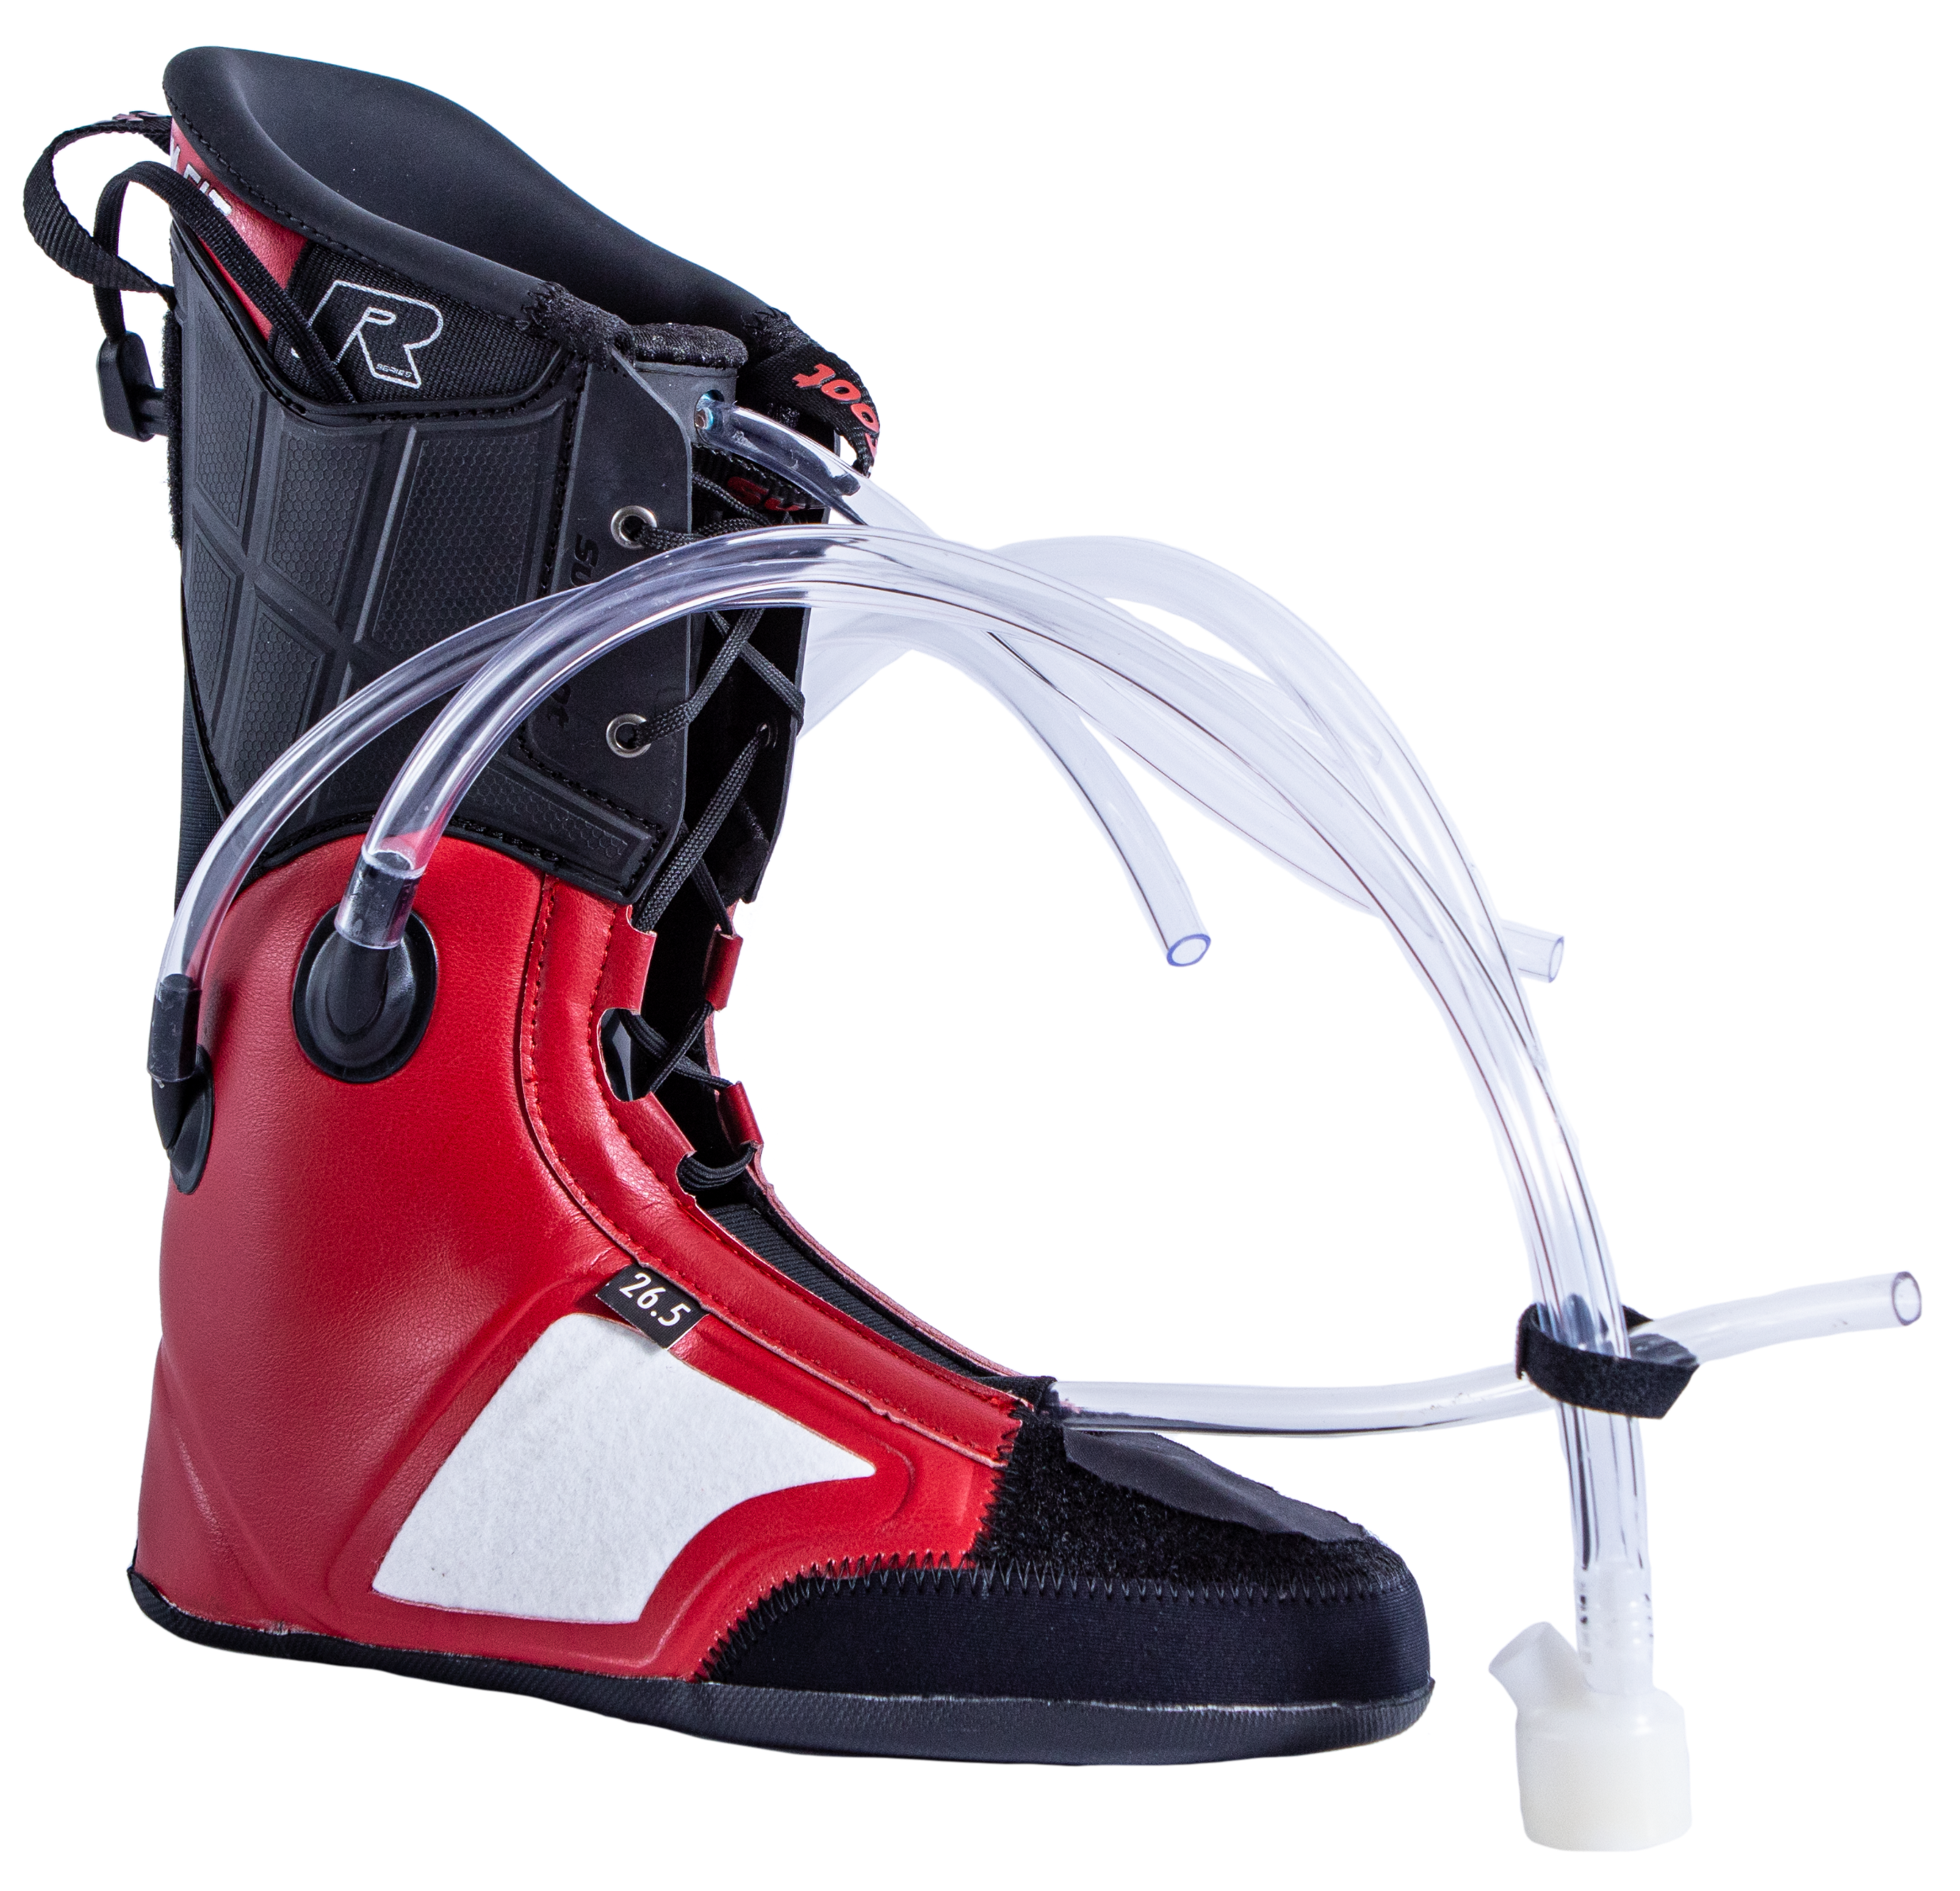 Surefoot Contoura R Heat Custom Foam Injected Ski Boot Liner. Red liner with black 'R' for race. Front lacing and plastic tubes for memory foam injection. Heating element cord for heater battery connection located on the top outer edge.